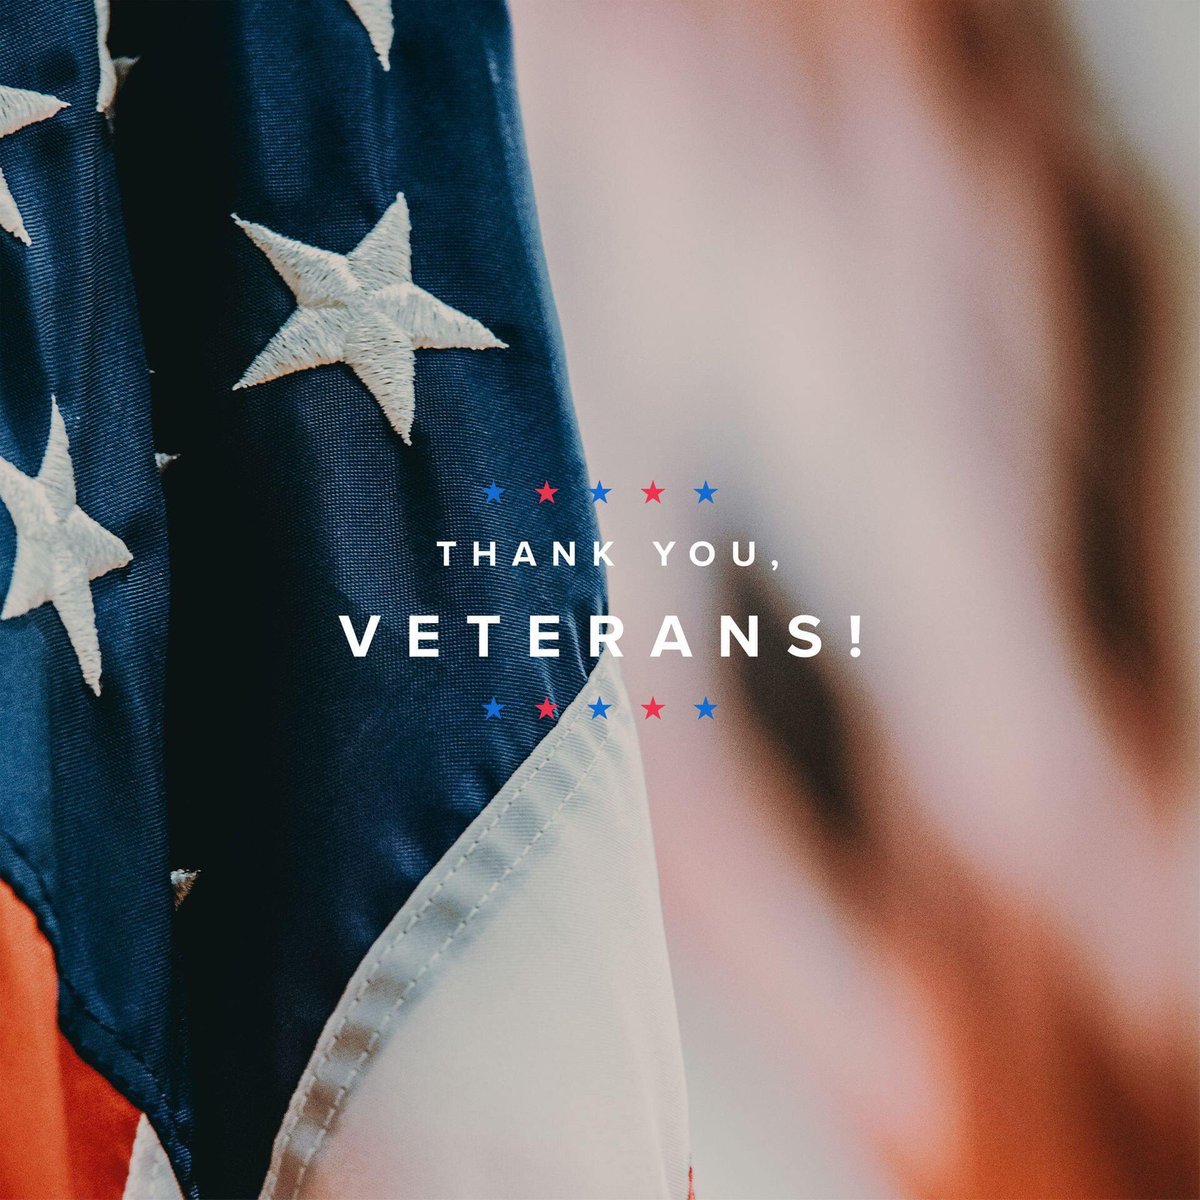 Happy Veteran's Day! So thankful for the service of all my family members and friends…and all those who have served! #veteransday2023 #happyveteransday